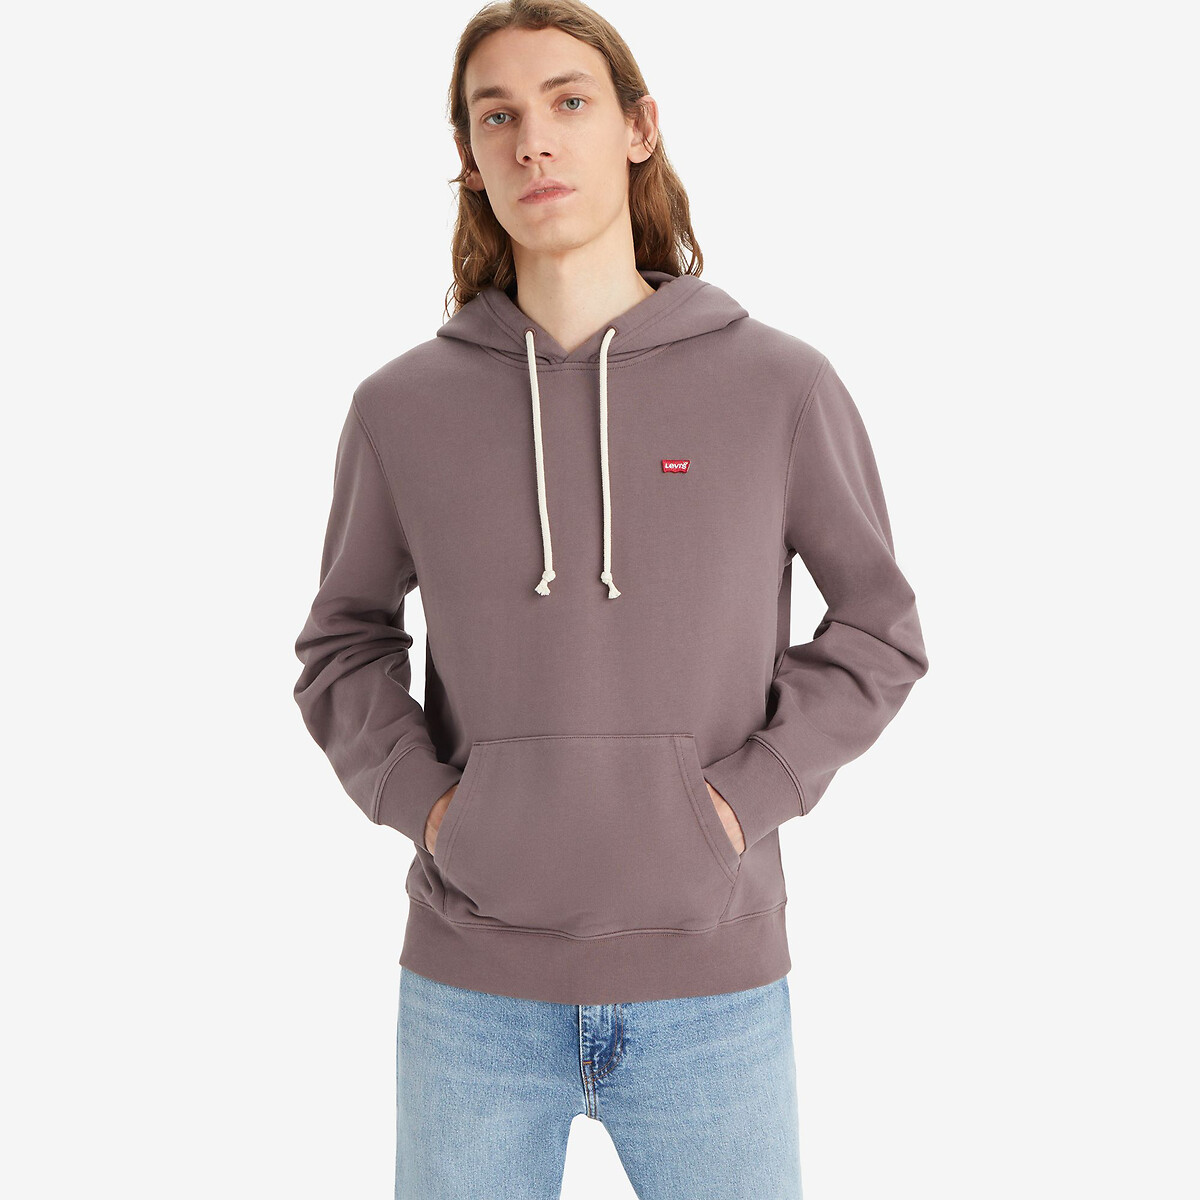 housemark embroidered logo hoodie in cotton